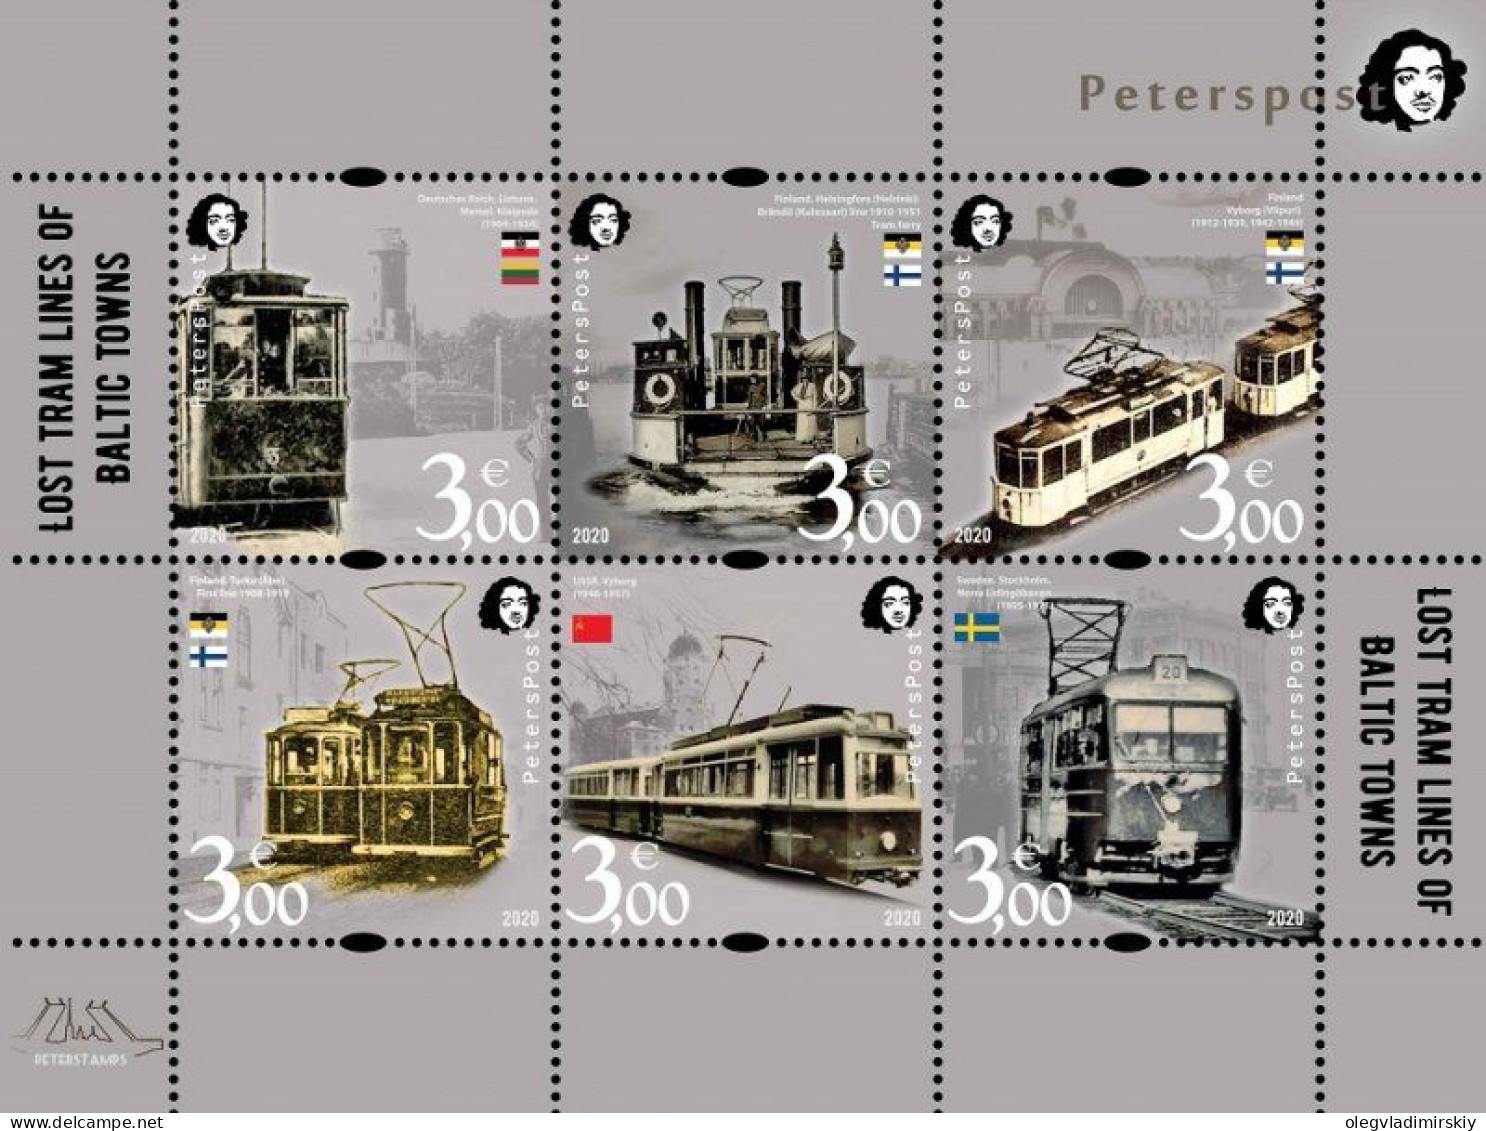 Finland 2020 Lost Tram Lines Of Baltic Towns Lighthouse Railway Station Ship Peterspost Set Of 6 Stamps In Block MNH - Leuchttürme